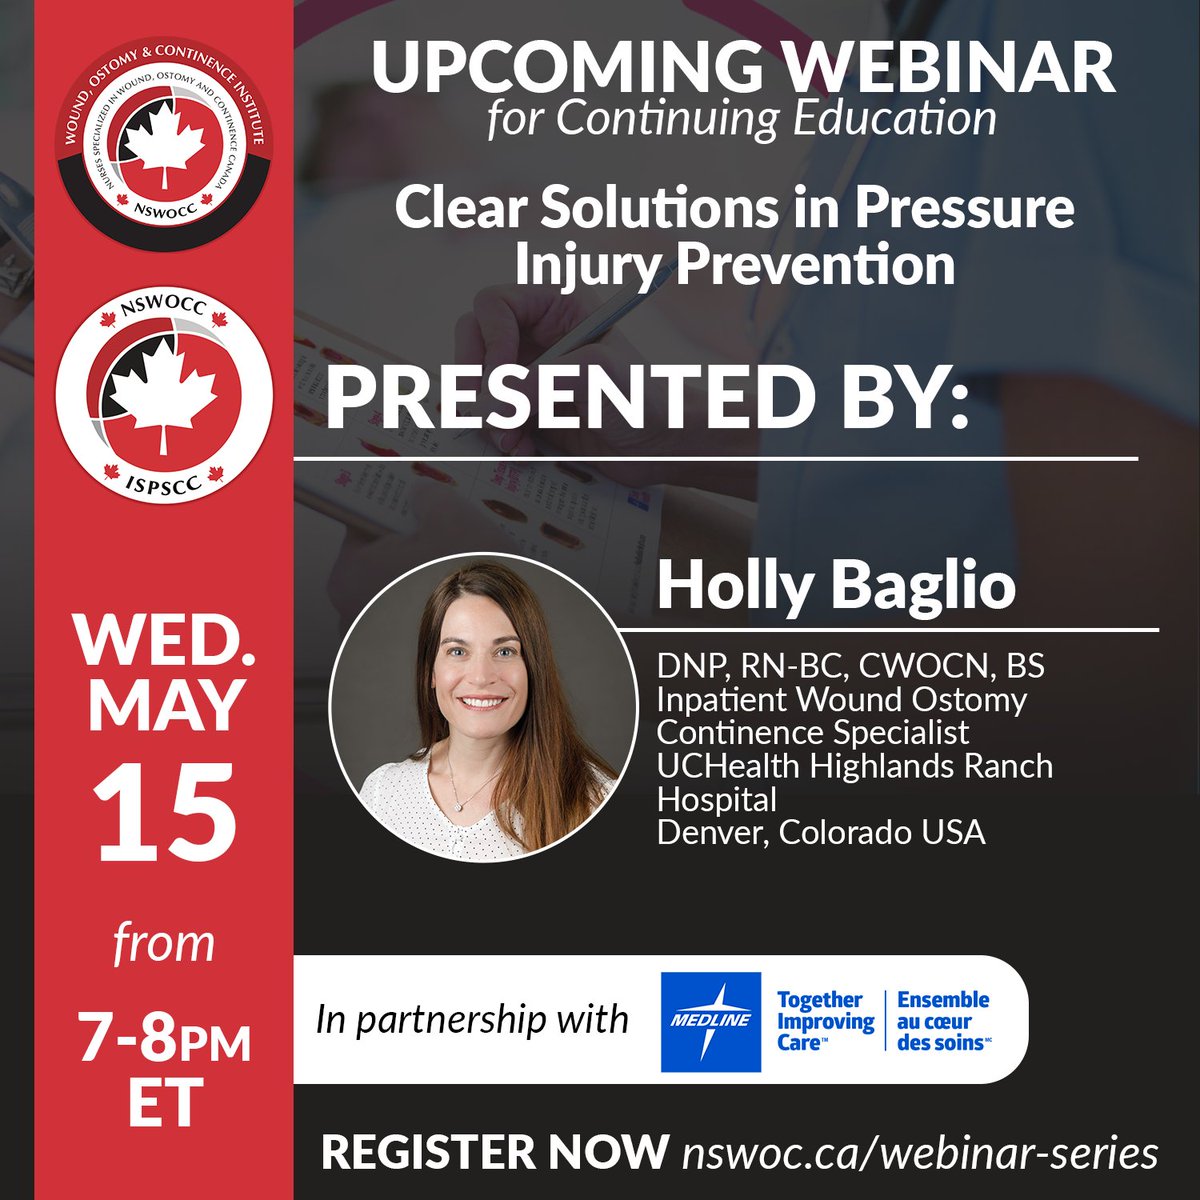 Only three weeks away! On May 15, get ready for the NSWOCC & WOC Institute Continuing Education Webinar: 'Clear Solutions in Pressure Injury Prevention'. 

We guarantee you won't want to miss it! Register now for FREE at 
us02web.zoom.us/webinar/regist…